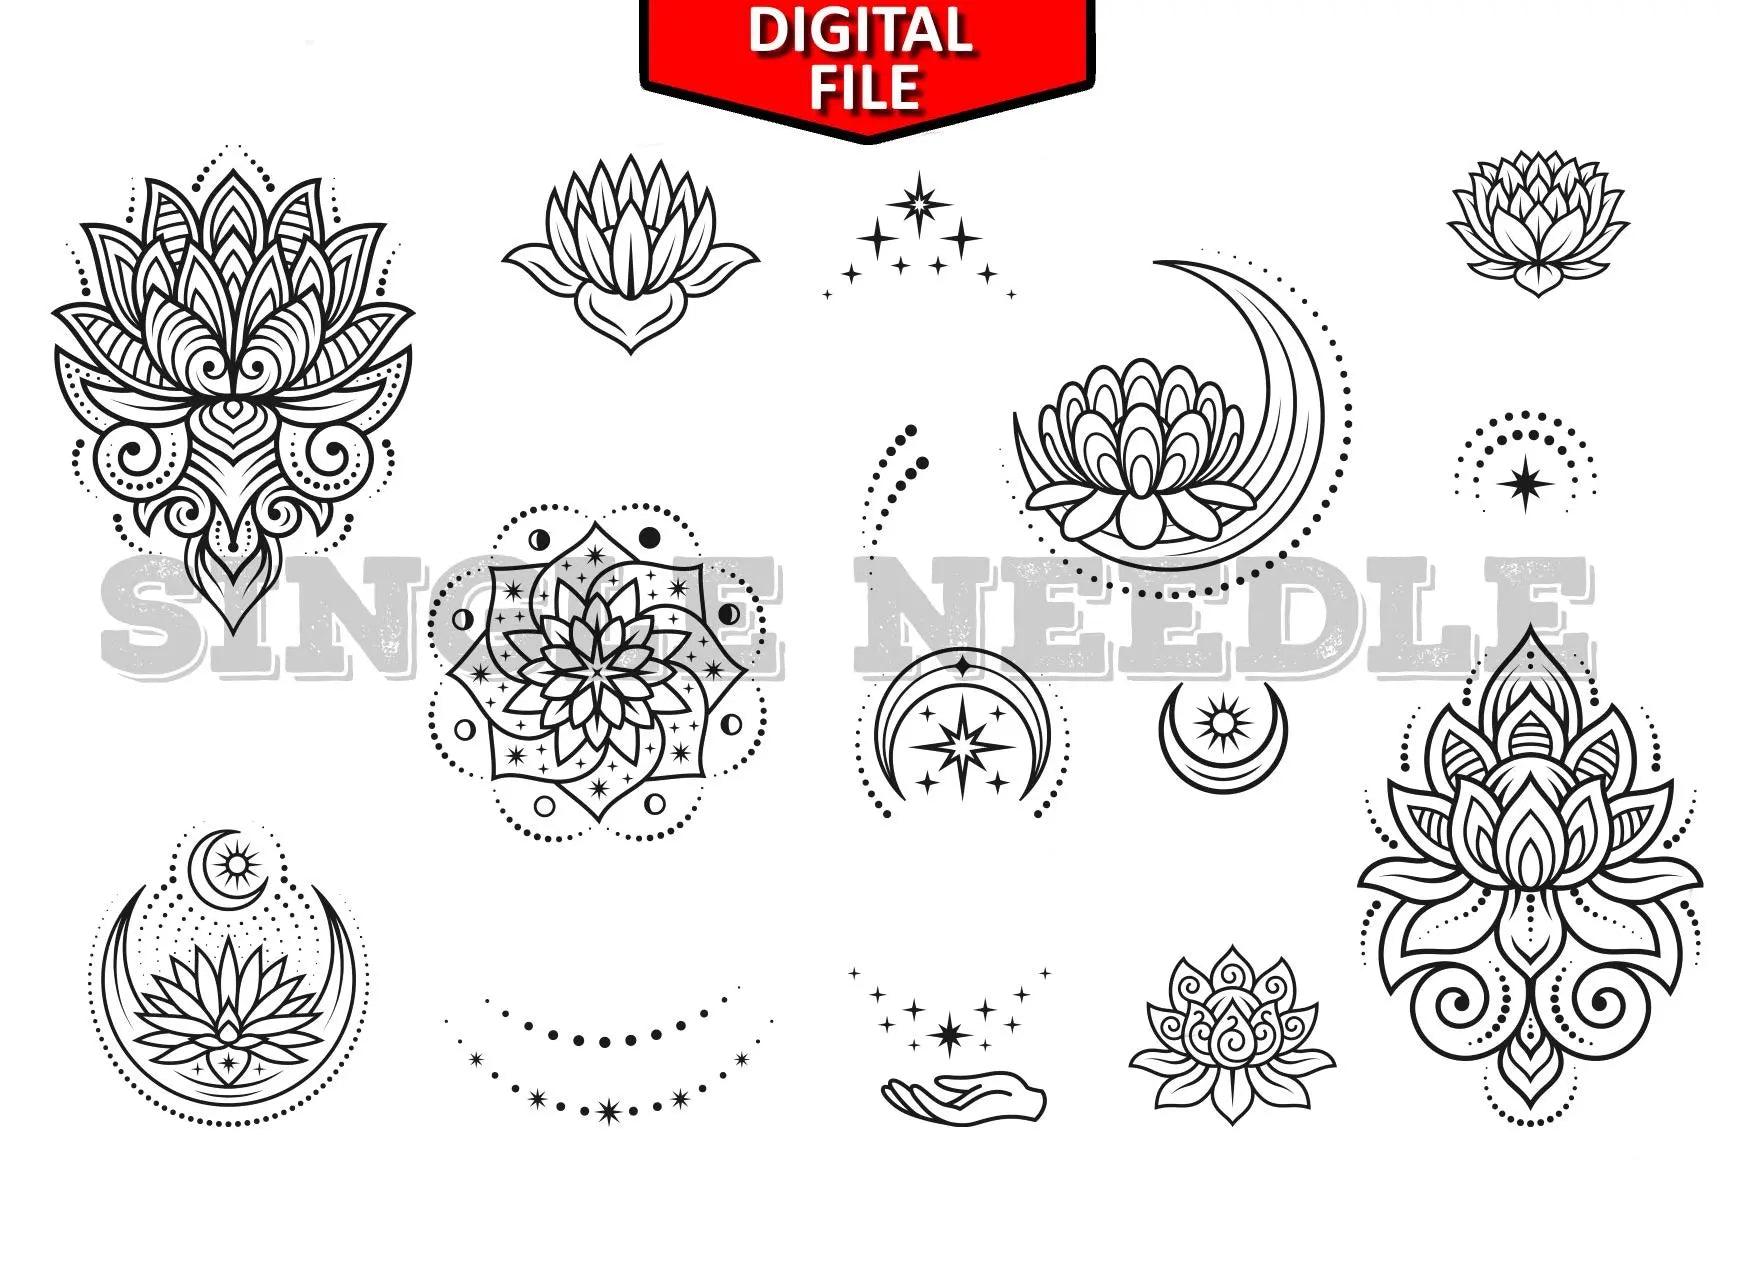 Moon Stars and Lotus Tattoo Flash Sheet Stencil for Real Stick and Poke Tattoos - SINGLE NEEDLE